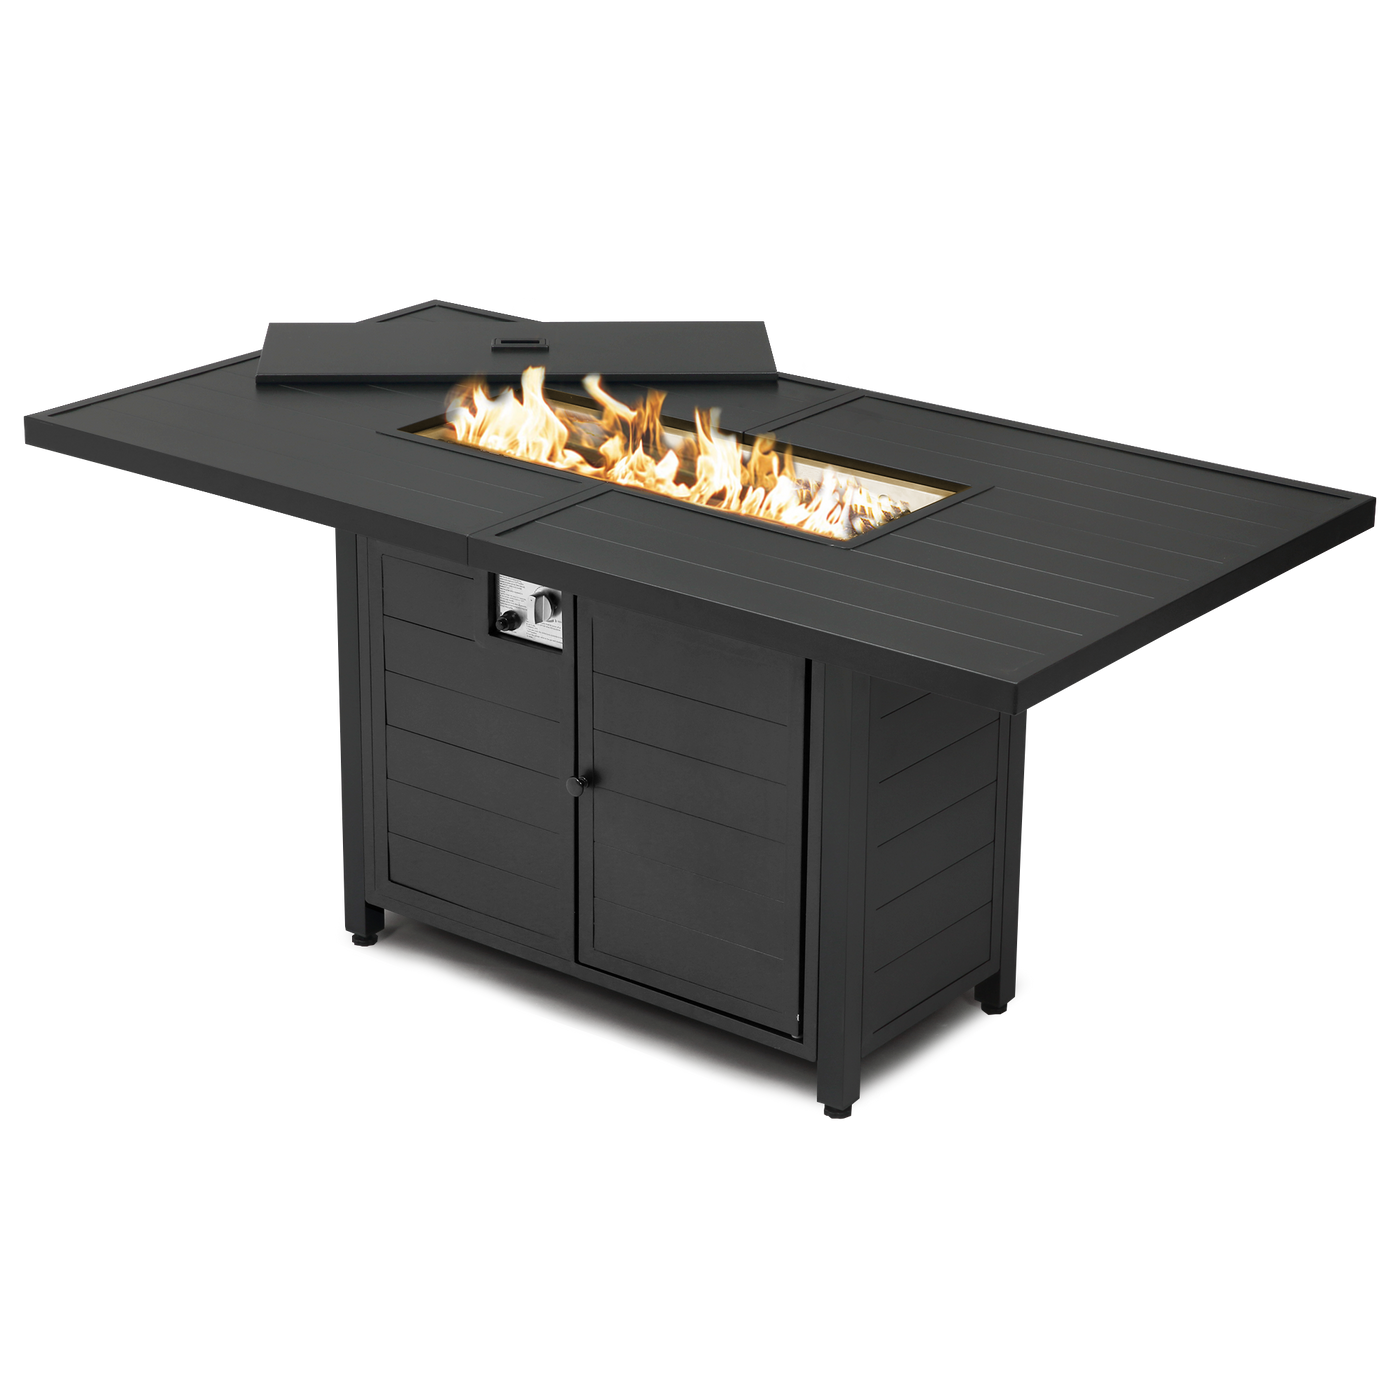 Pizzello Passione - 62.5" Aluminum Propane Fire Pit Table 50,000 BTU Outdoor Rectangular Dining Table